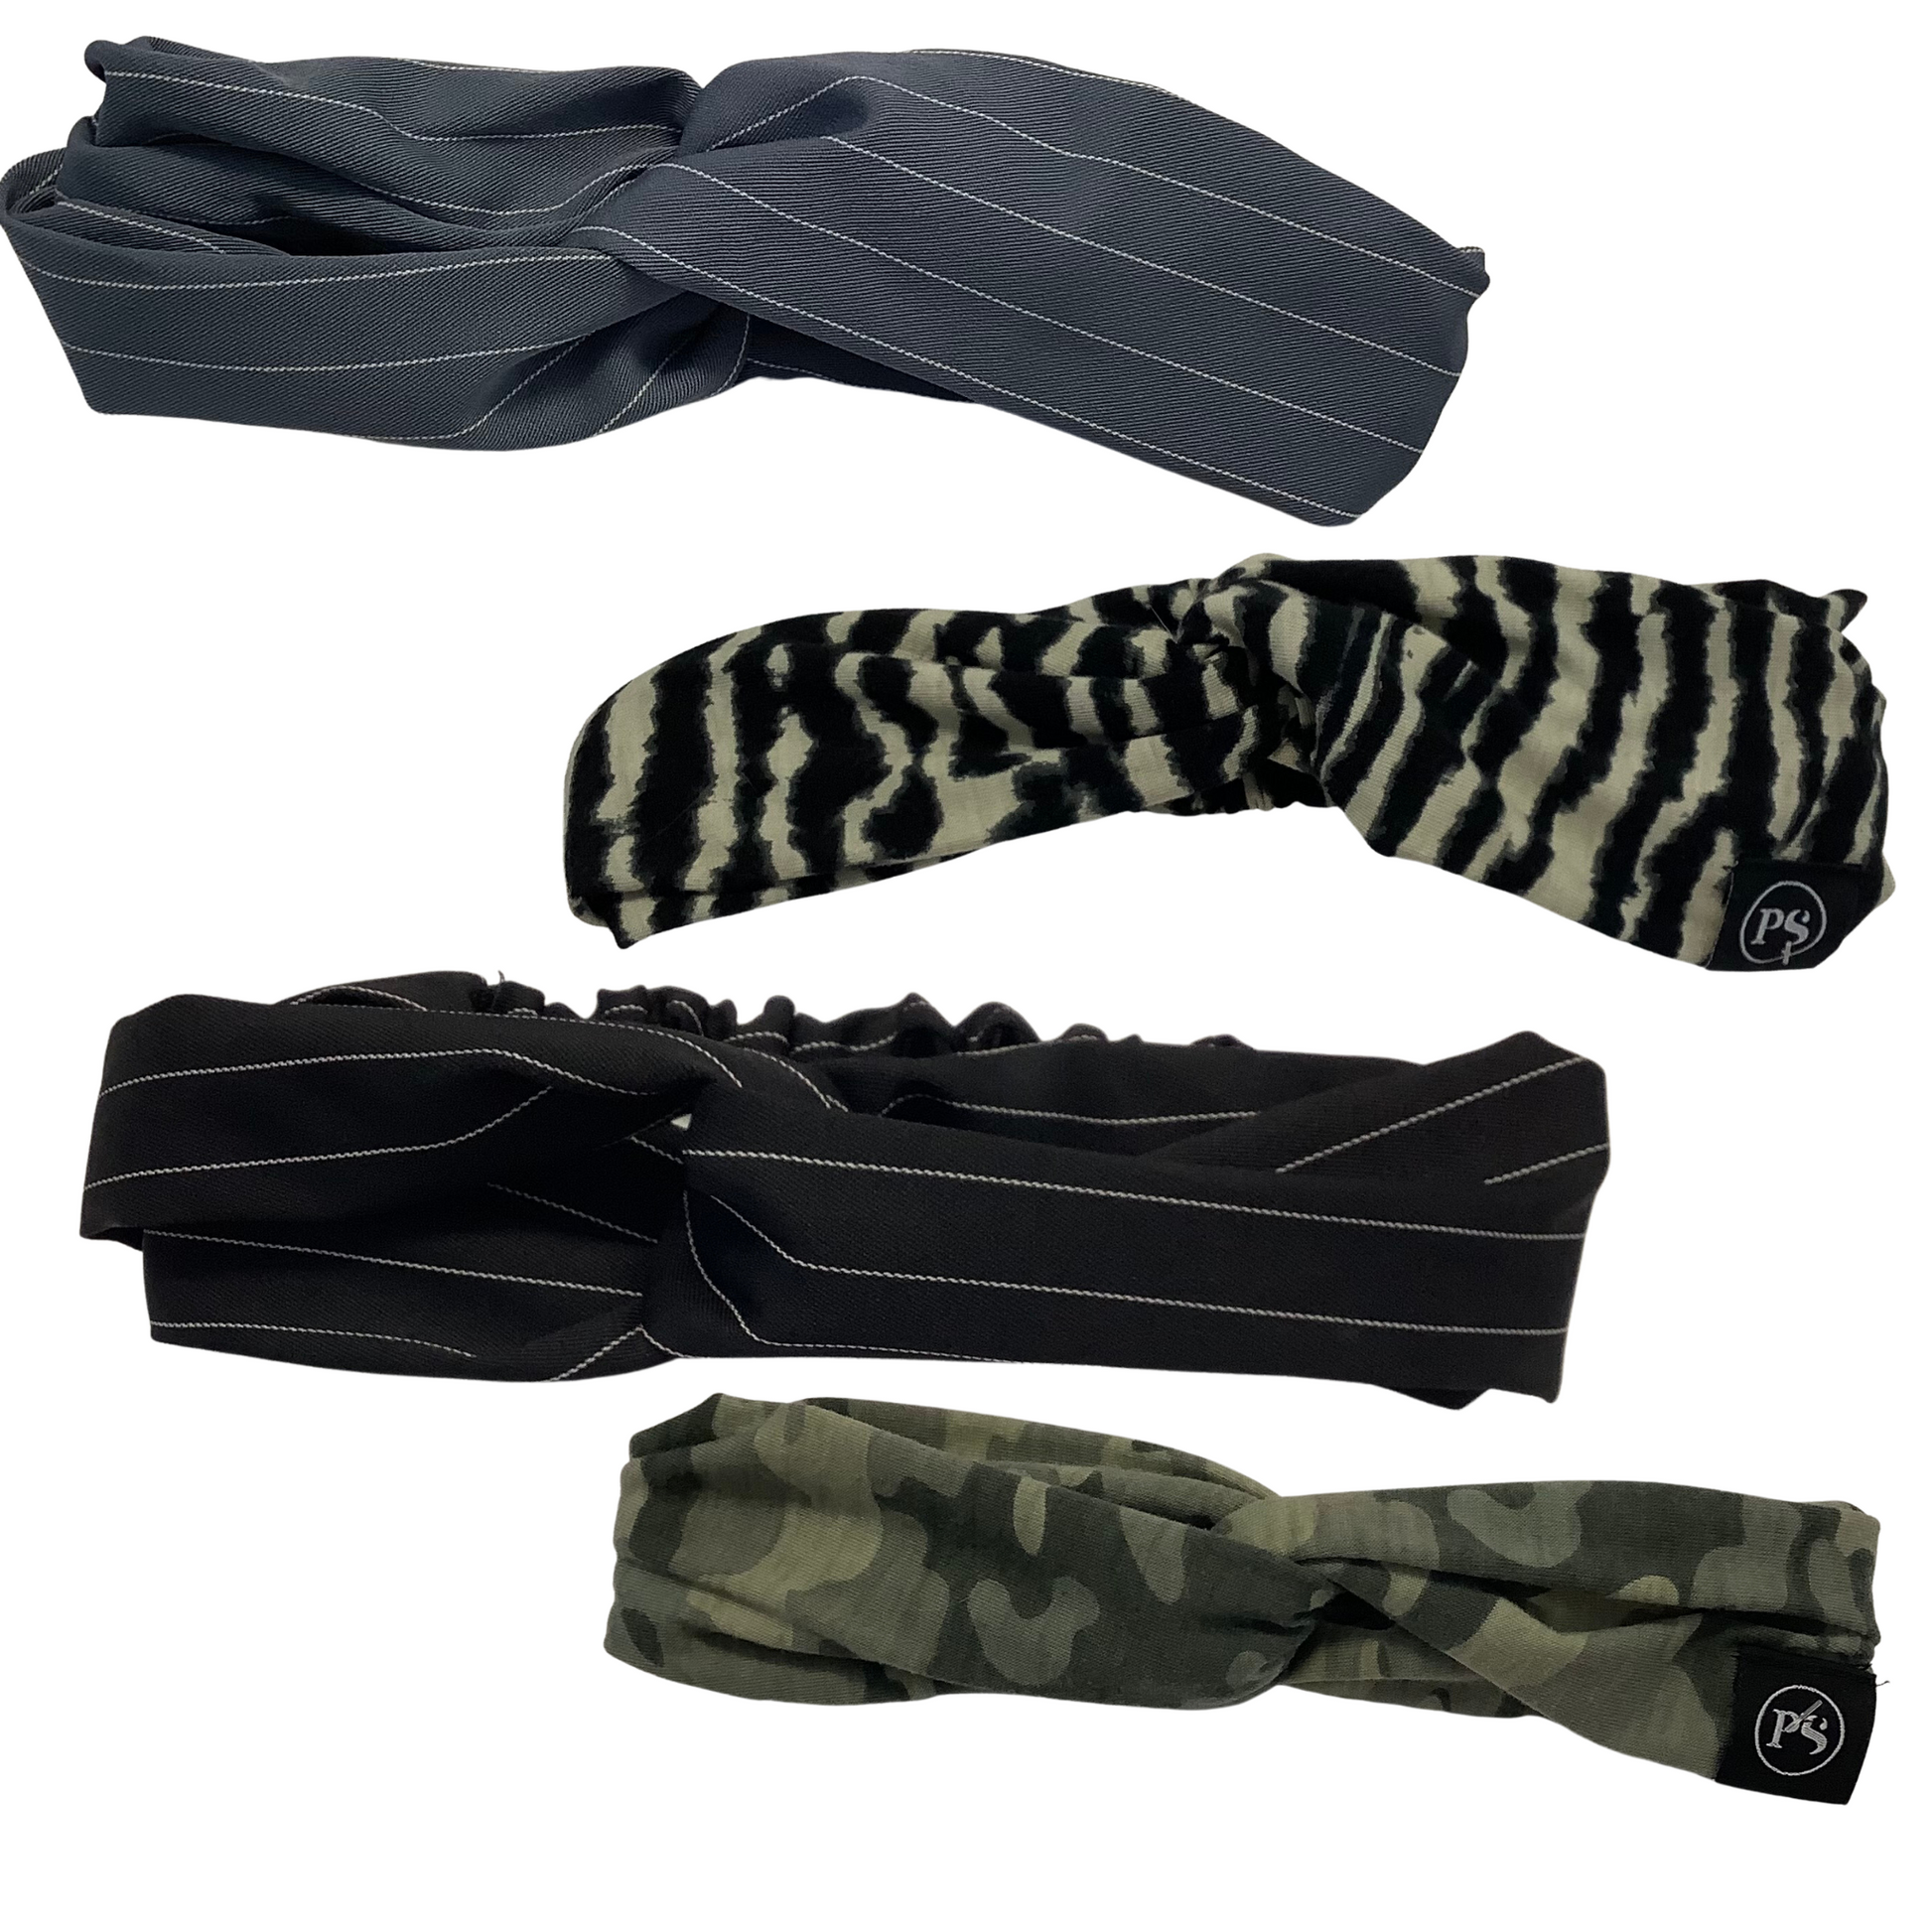 These beautiful Women's Headbands come in a variety of colors to match nearly any style. Perfect for adding a splash of color to any outfit. Available in black striped, Grey Striped, Zebra print, or camoflauge